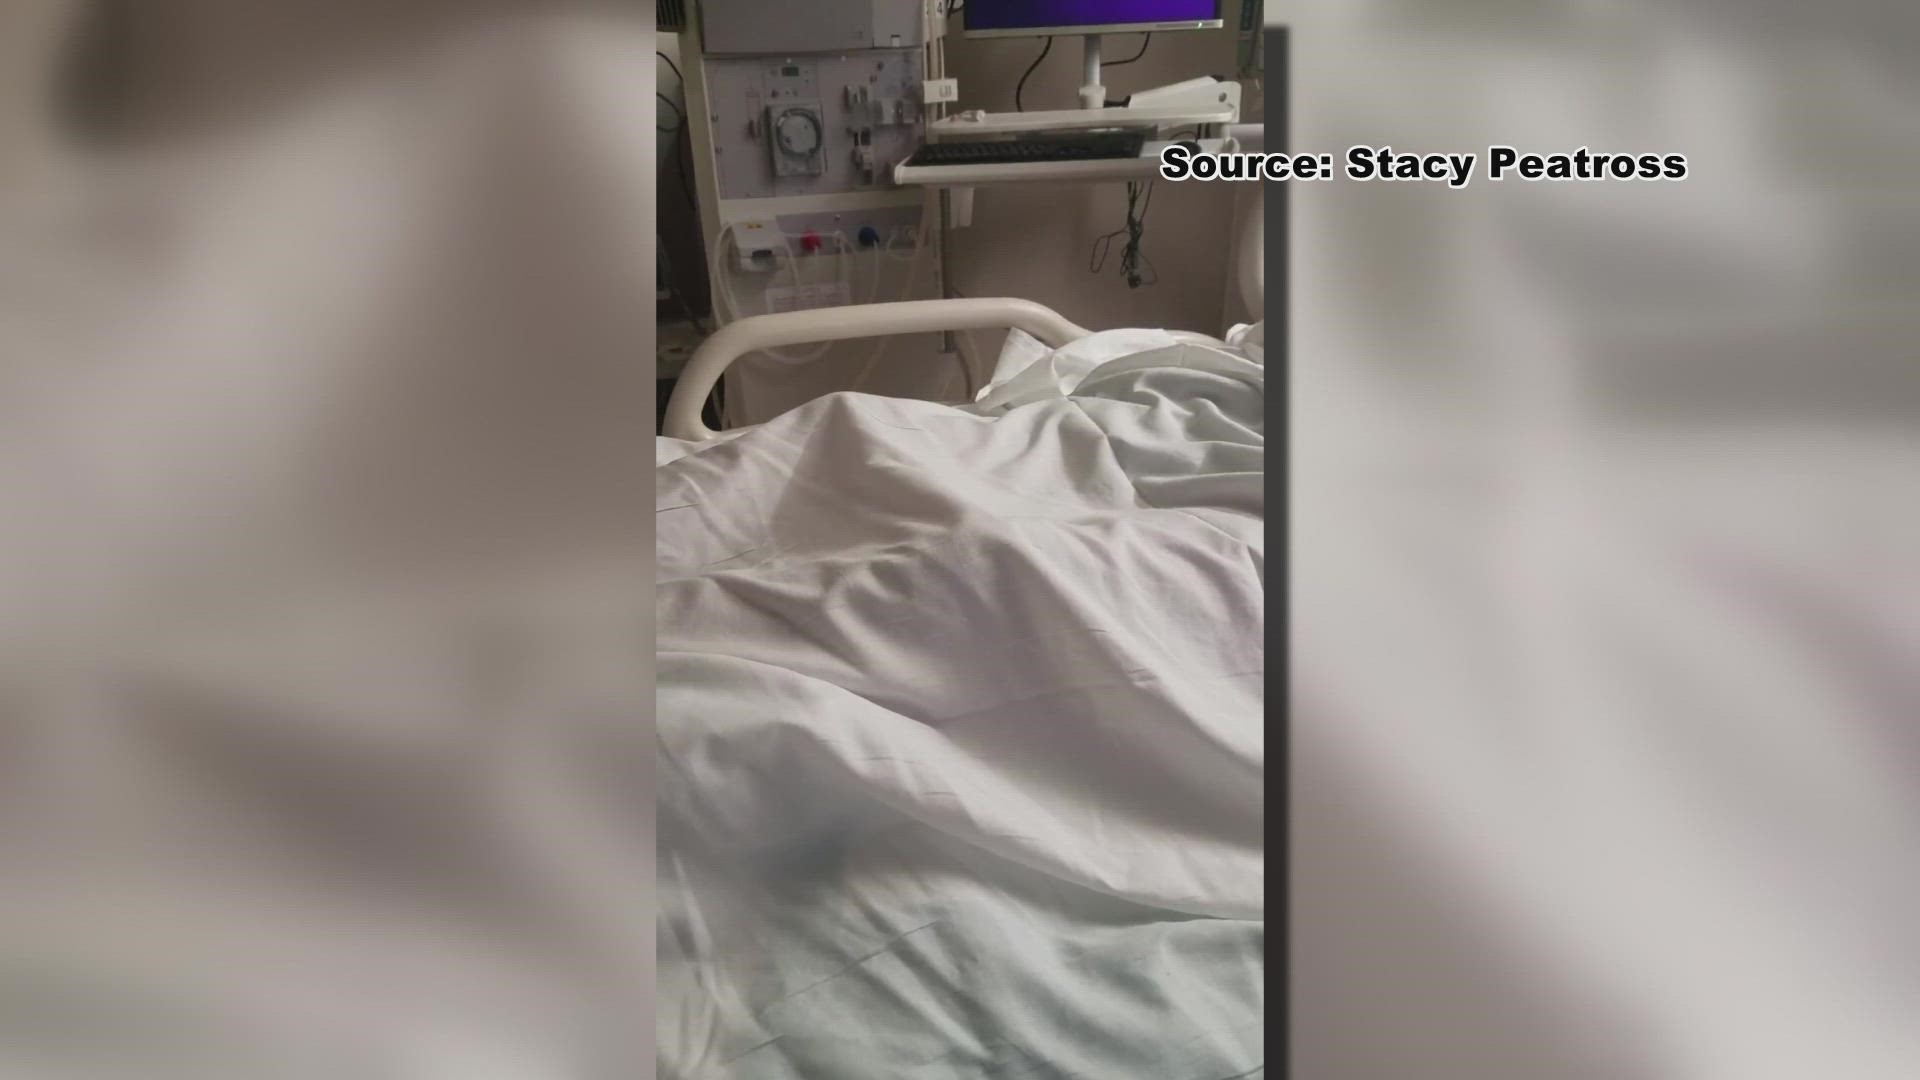 Tionna Hairston's mom records her daughter's first movements after flatlining for 30 minutes.  Tionna's COVID recovery continues 20 months after this moment.